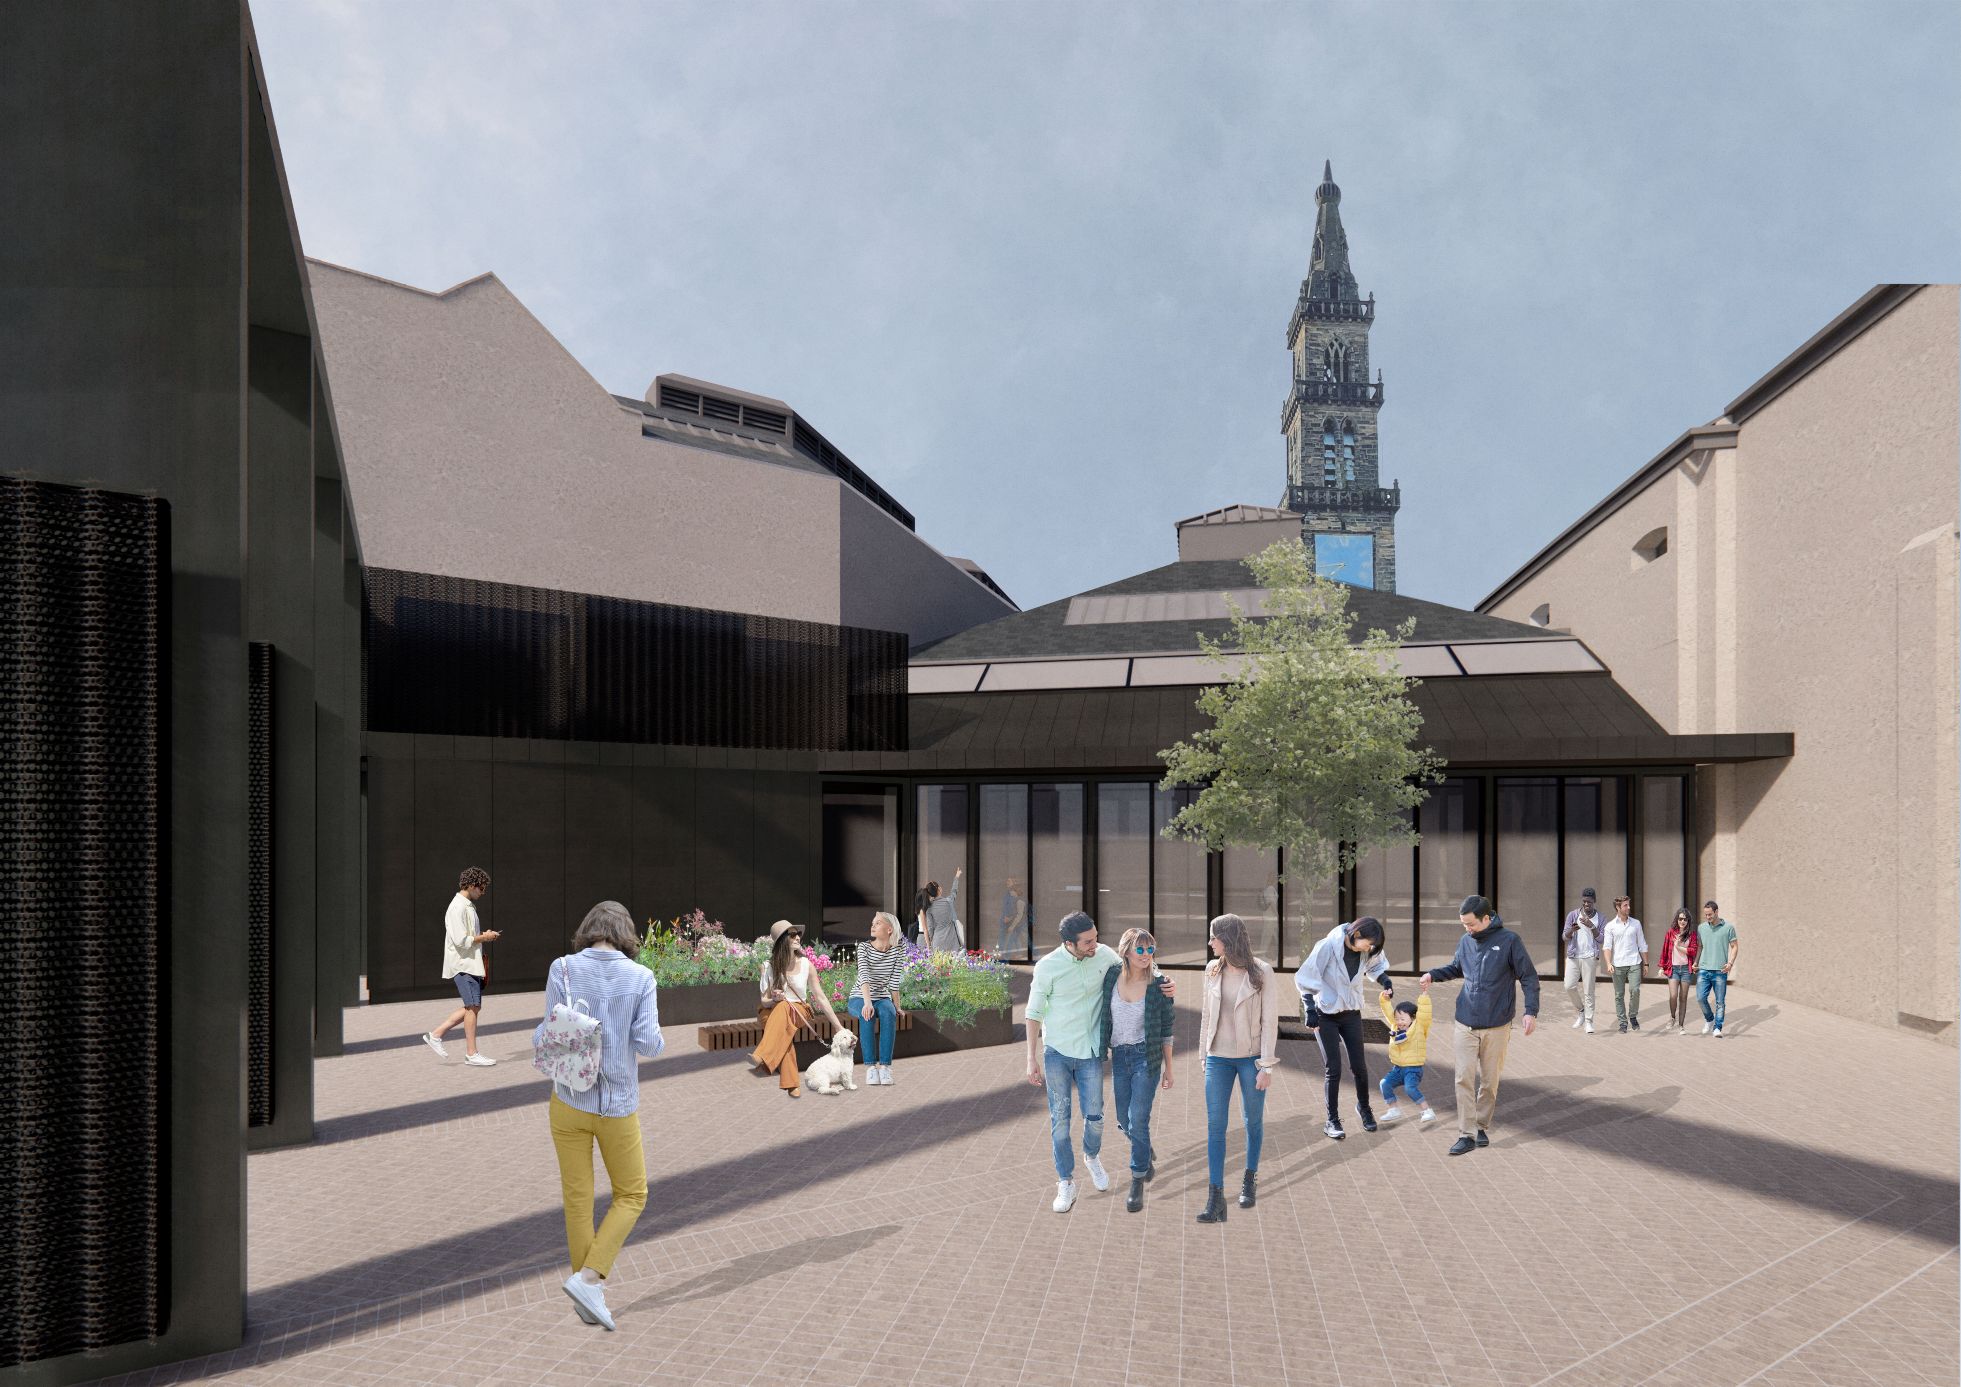 Planning approval and listed building consent for Glasgow’s A-listed Clydeside Halls refurb